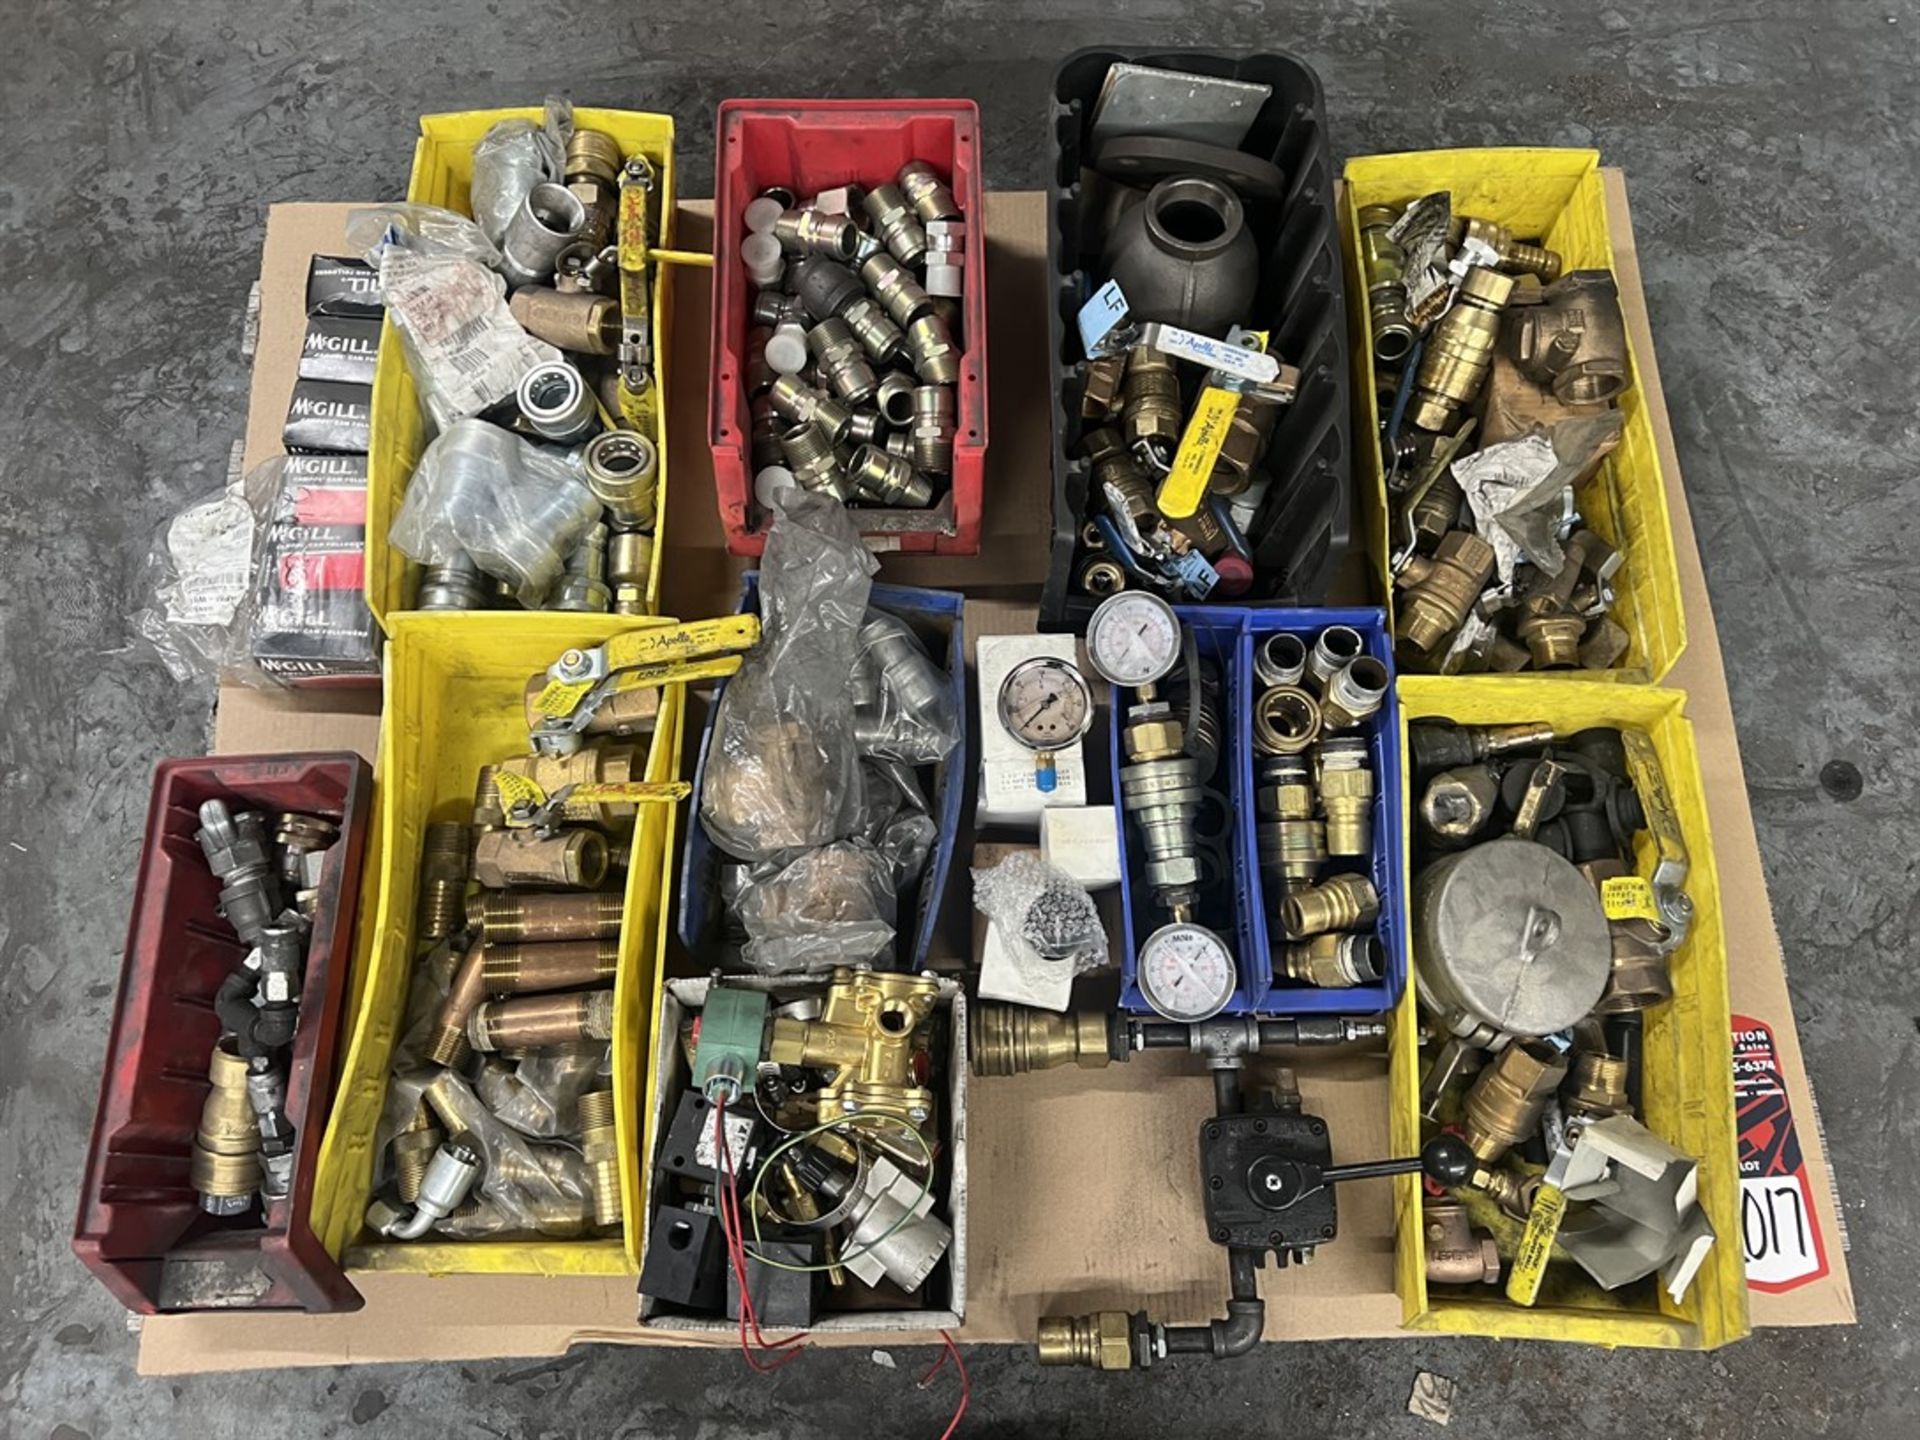 Lot of Assorted Hydraulic Couplings, Ball Valves, Bearings and Solenoids - Image 2 of 2